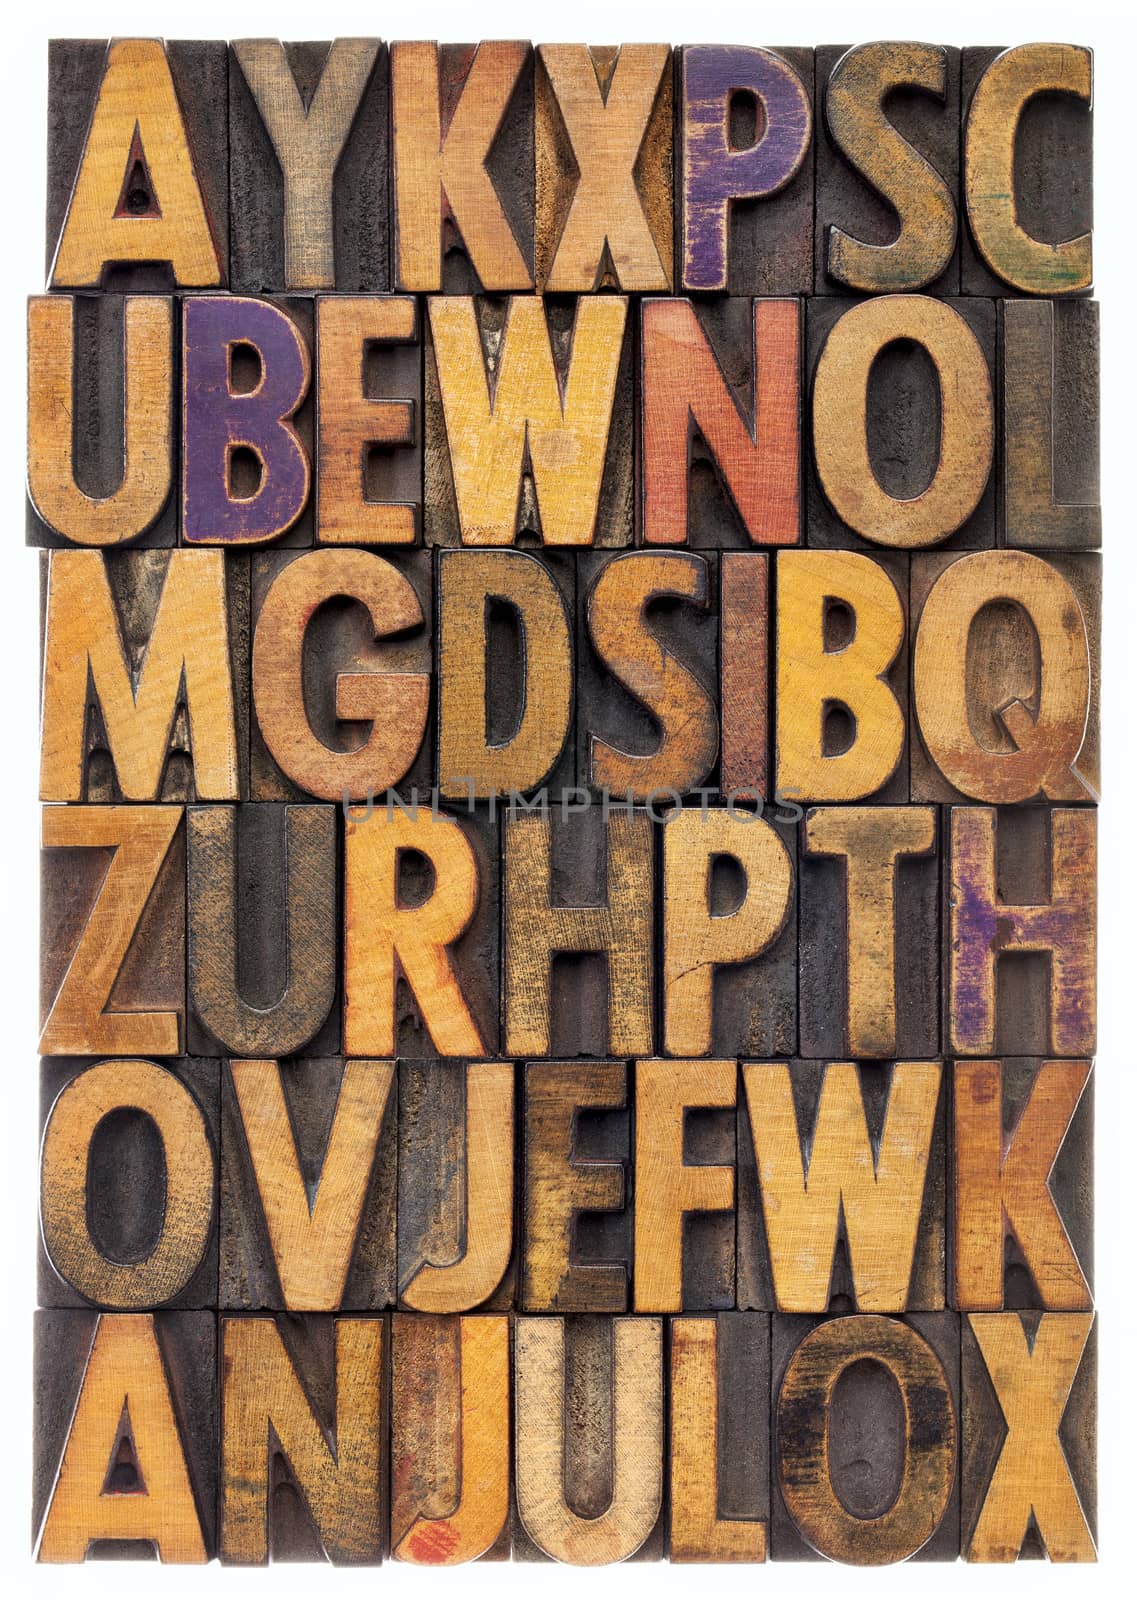 random letters of alphabet - vintage letterpress wood type printing blocks scratched and stained by color inks